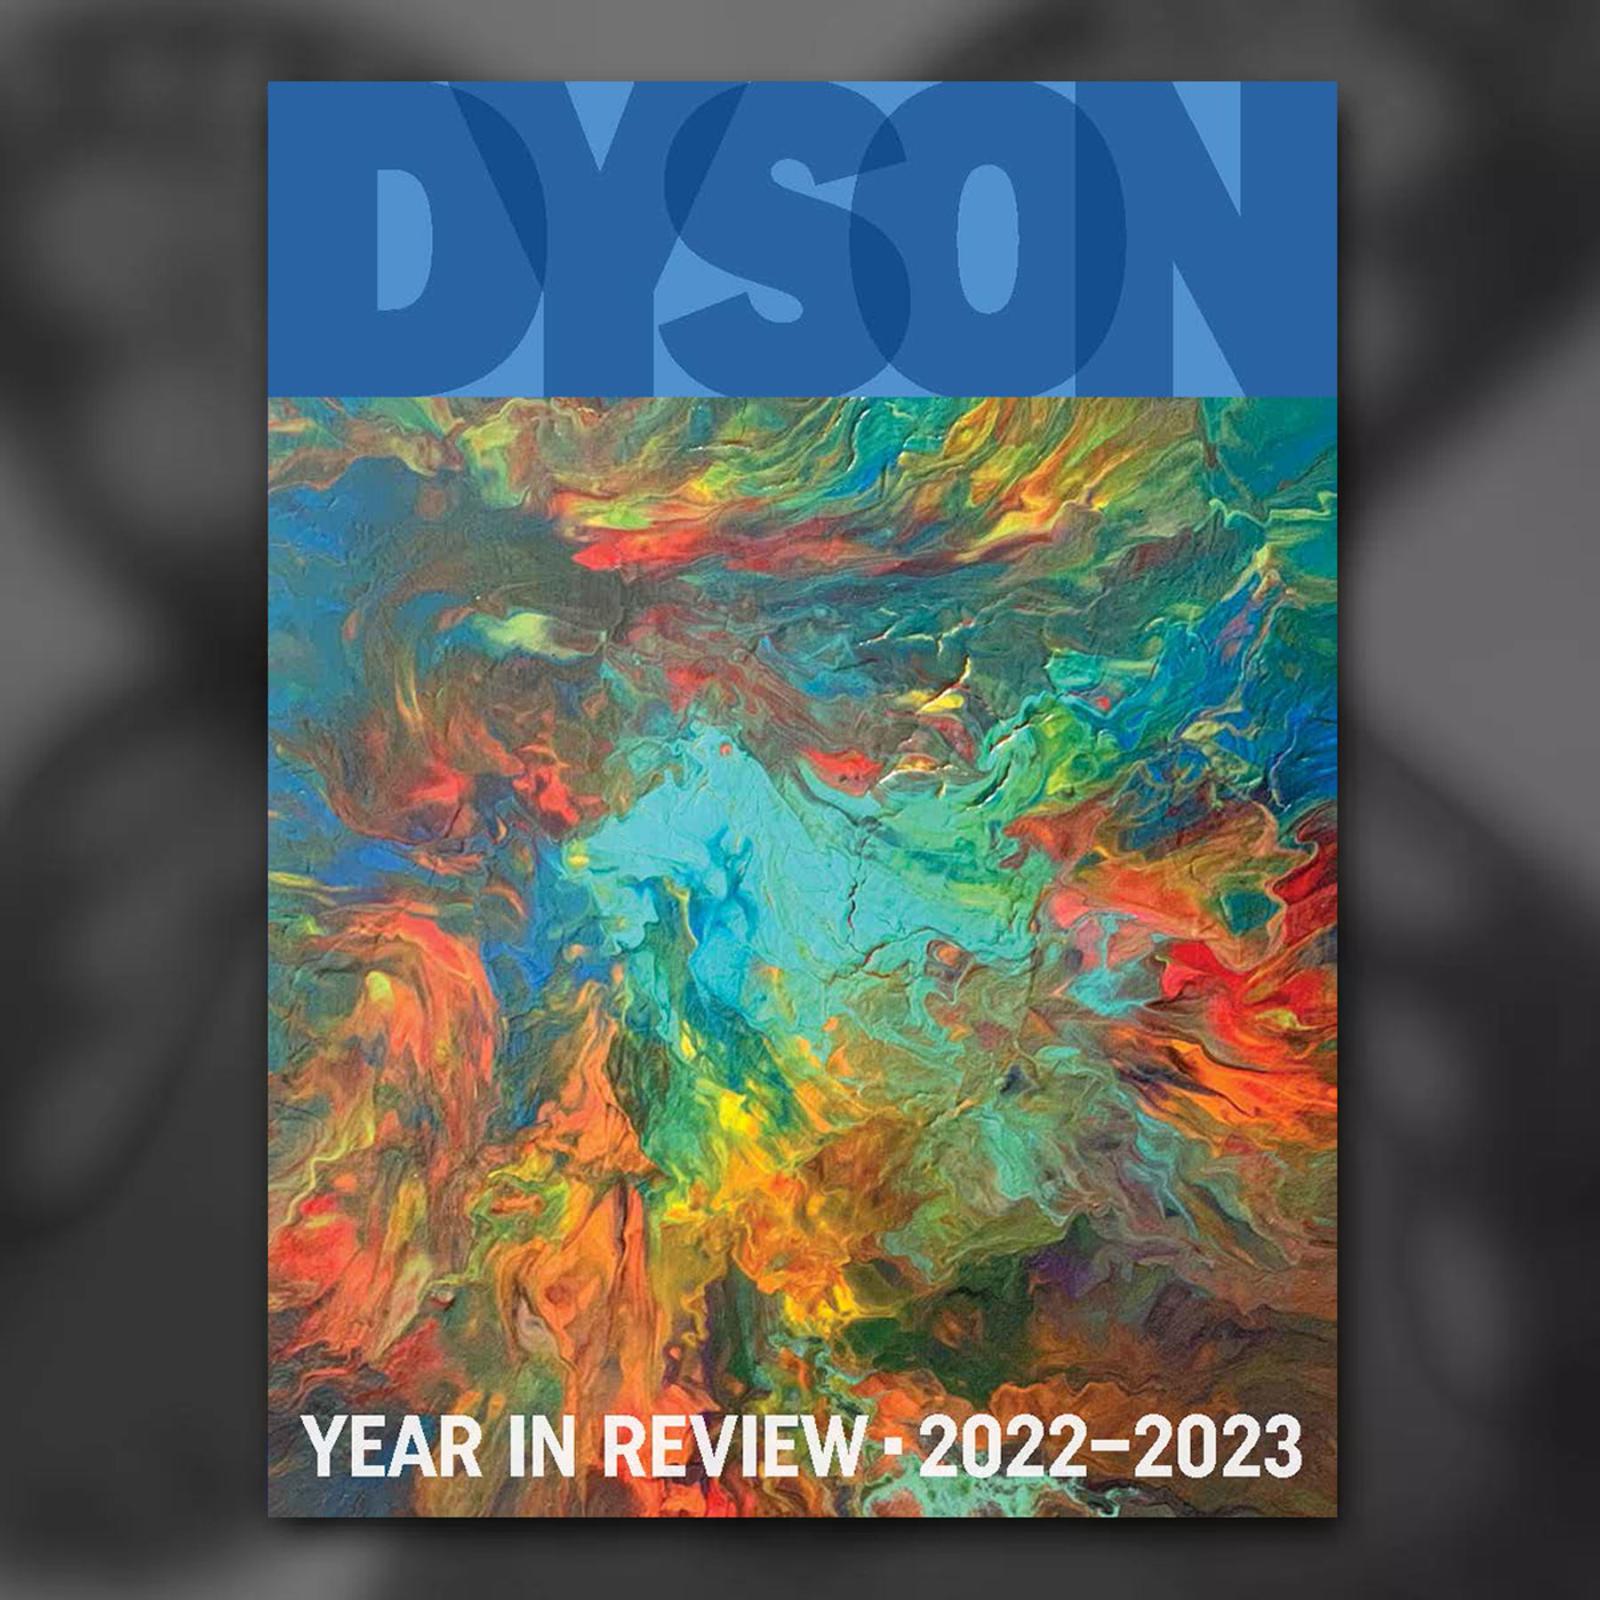 Cover of the Dyson Year in review publication from 2022-2023